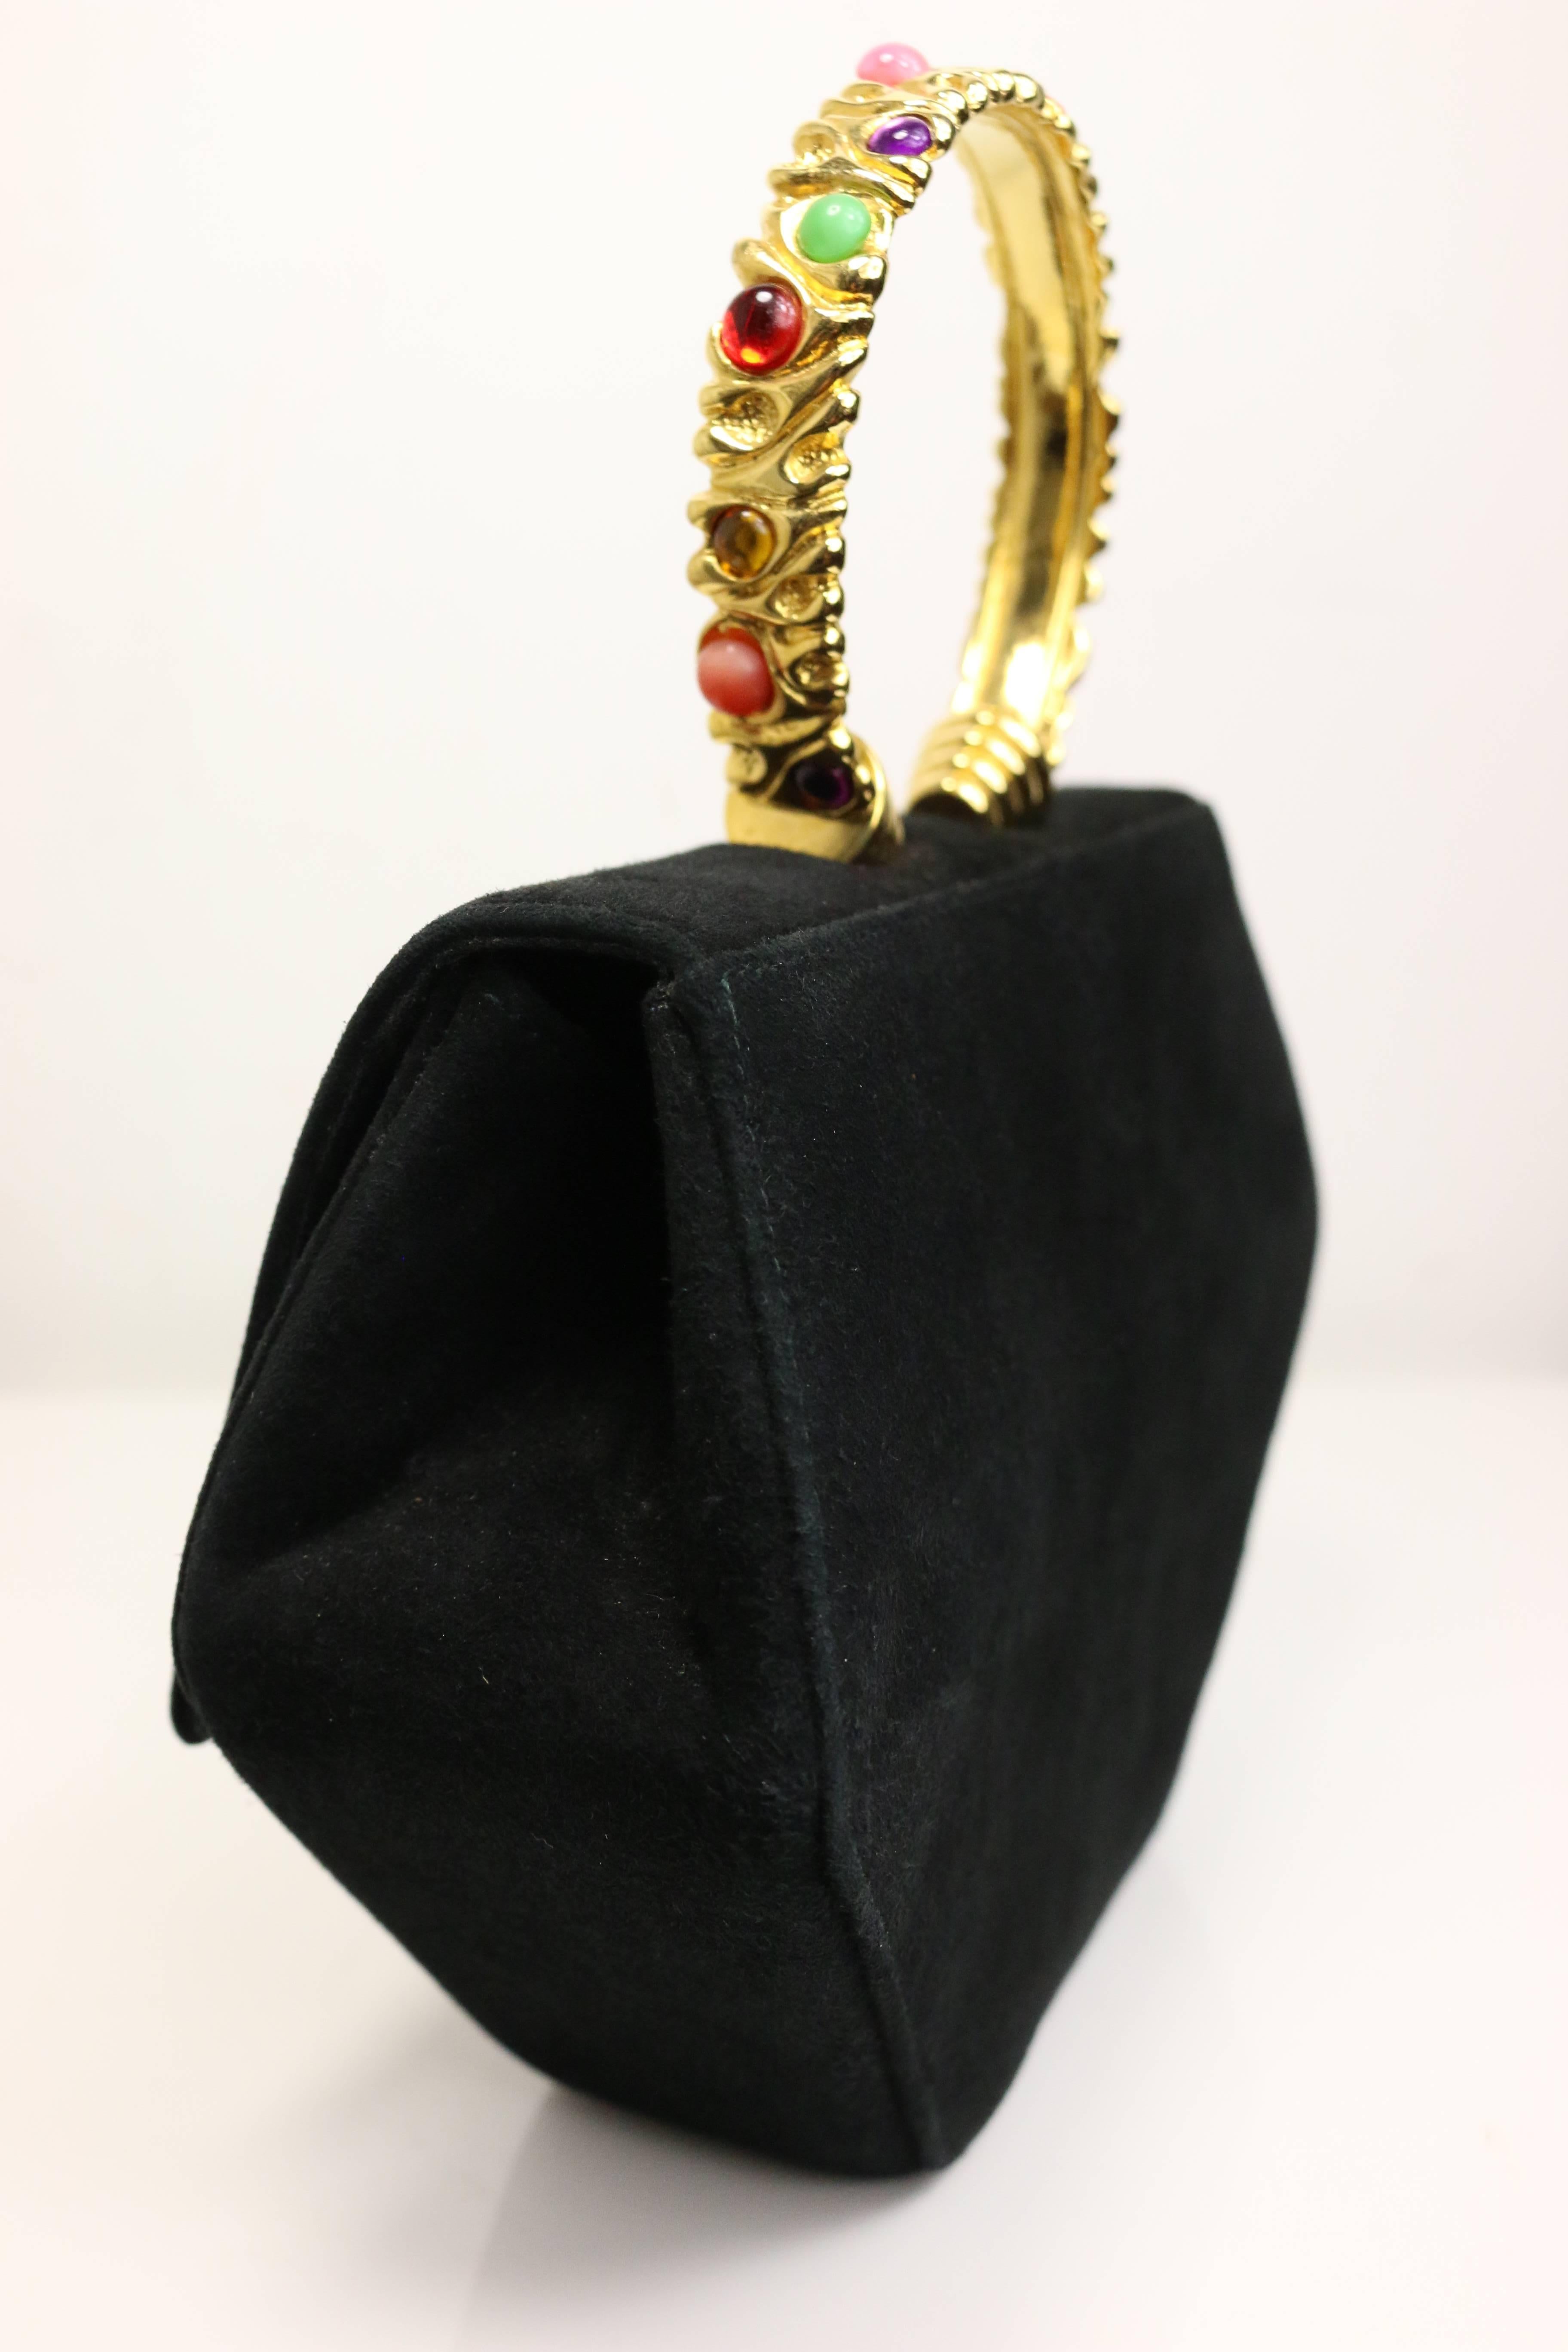 - Vintage 80s Rodo black suede with gold toned handle octagon handbag with strap. 

- Featuring fourteen multicoloured(red, pink, green, yellow, purple, black) stones gold toned handle. 

- Length: 7.5 inches. Height: 9 inches. Width: 2.5